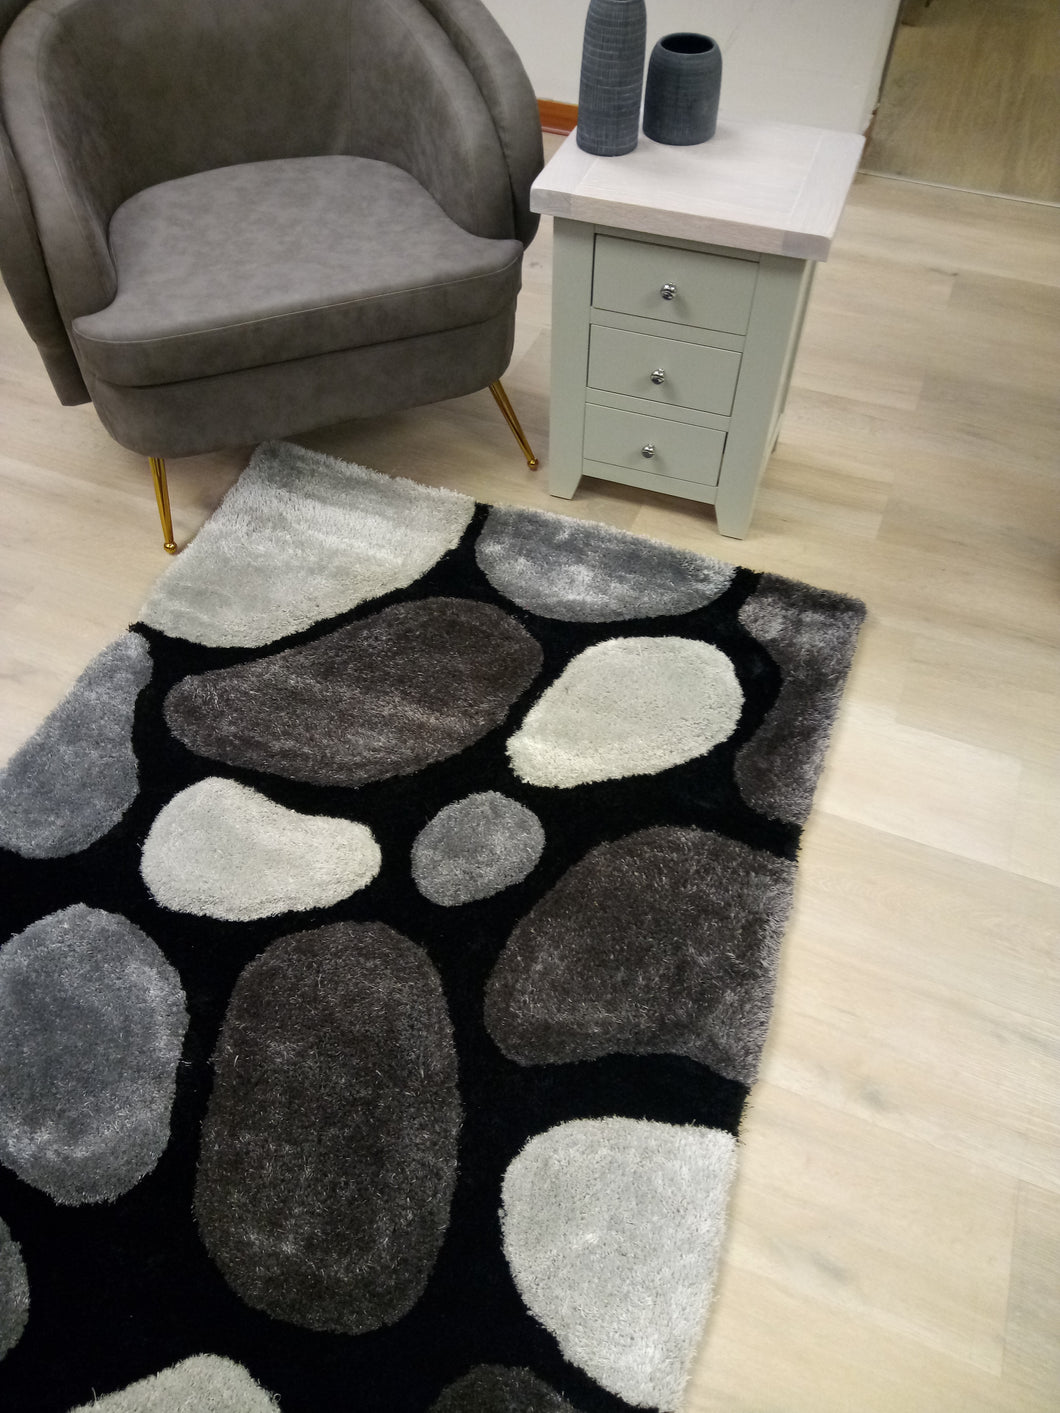 Handmade Rugs 3D Carved Stepping Stones rug 120cm x 170cm.